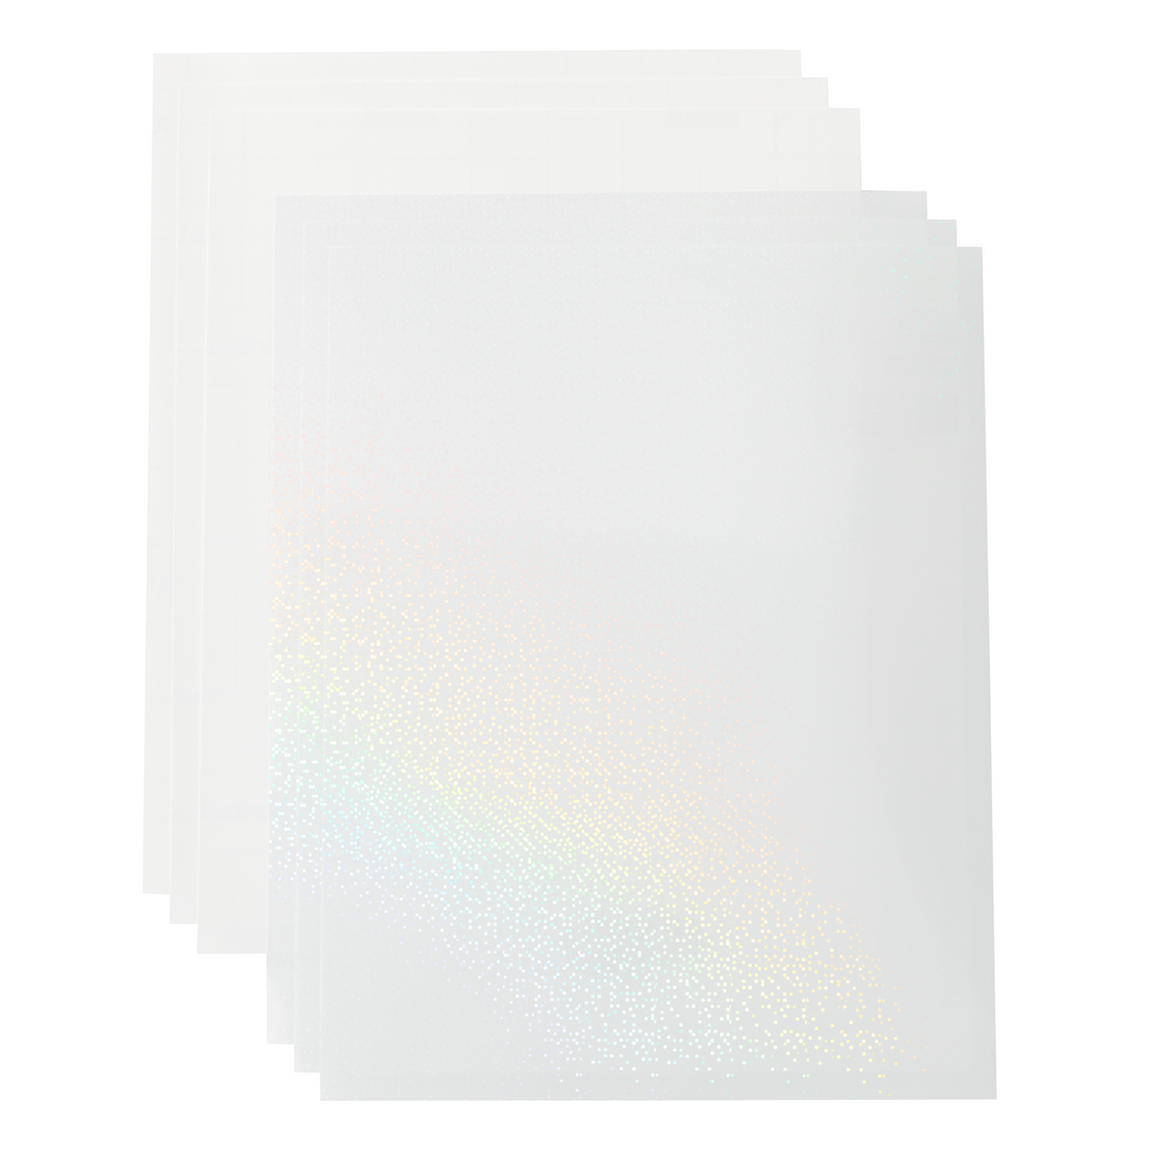 Printable Waterproof Holographic Sticker Set - Letter (5 ct)